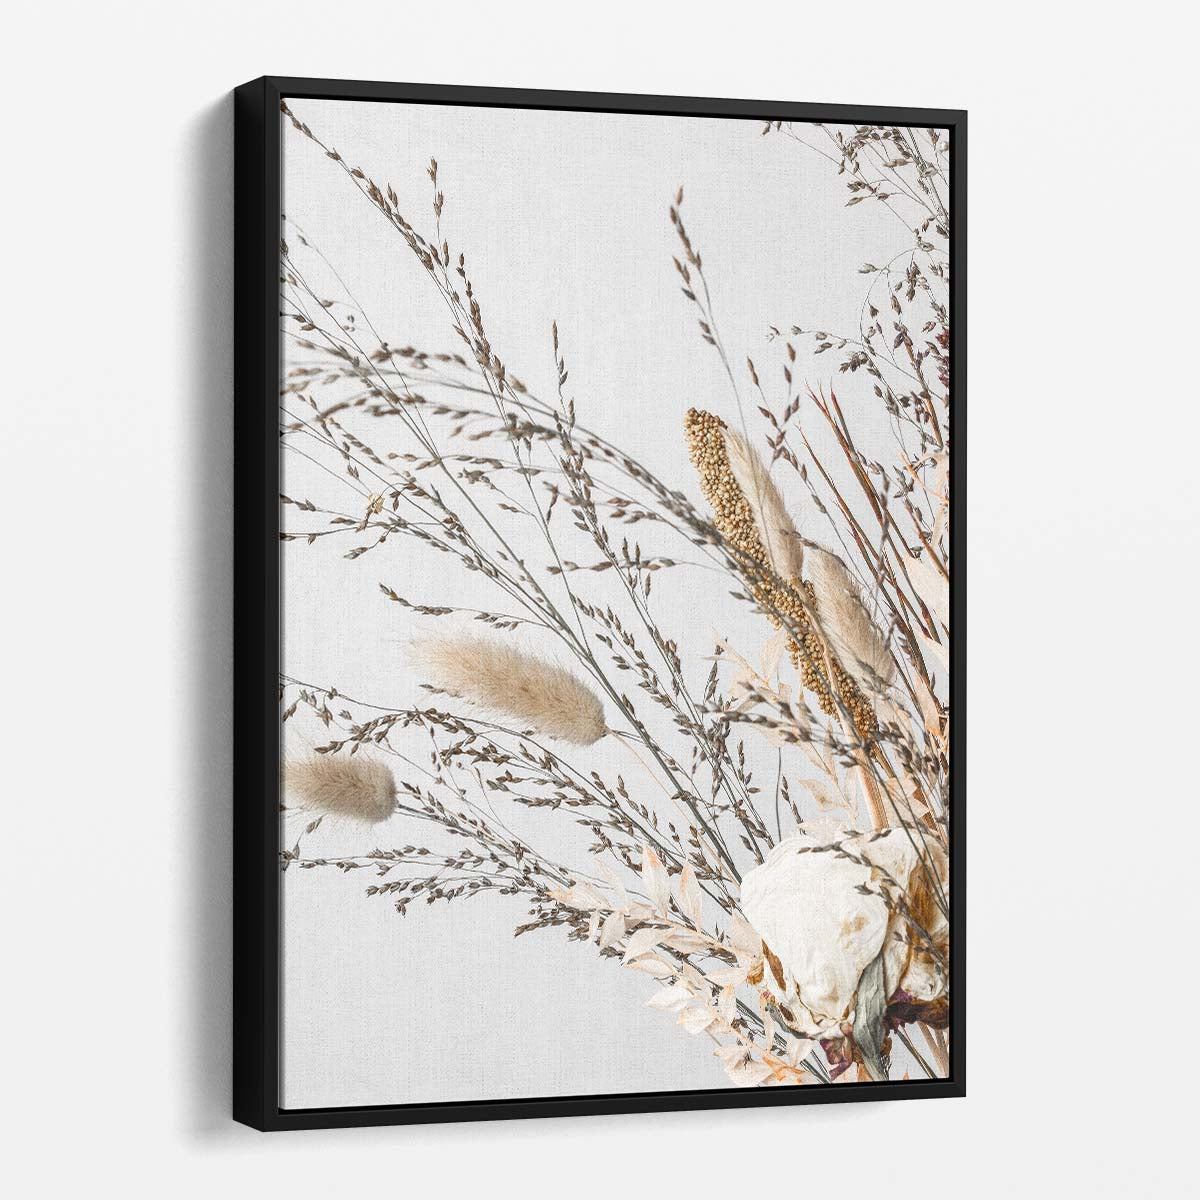 Autumn Botanical Photography Dried Floral Still Life on Grey by Luxuriance Designs, made in USA